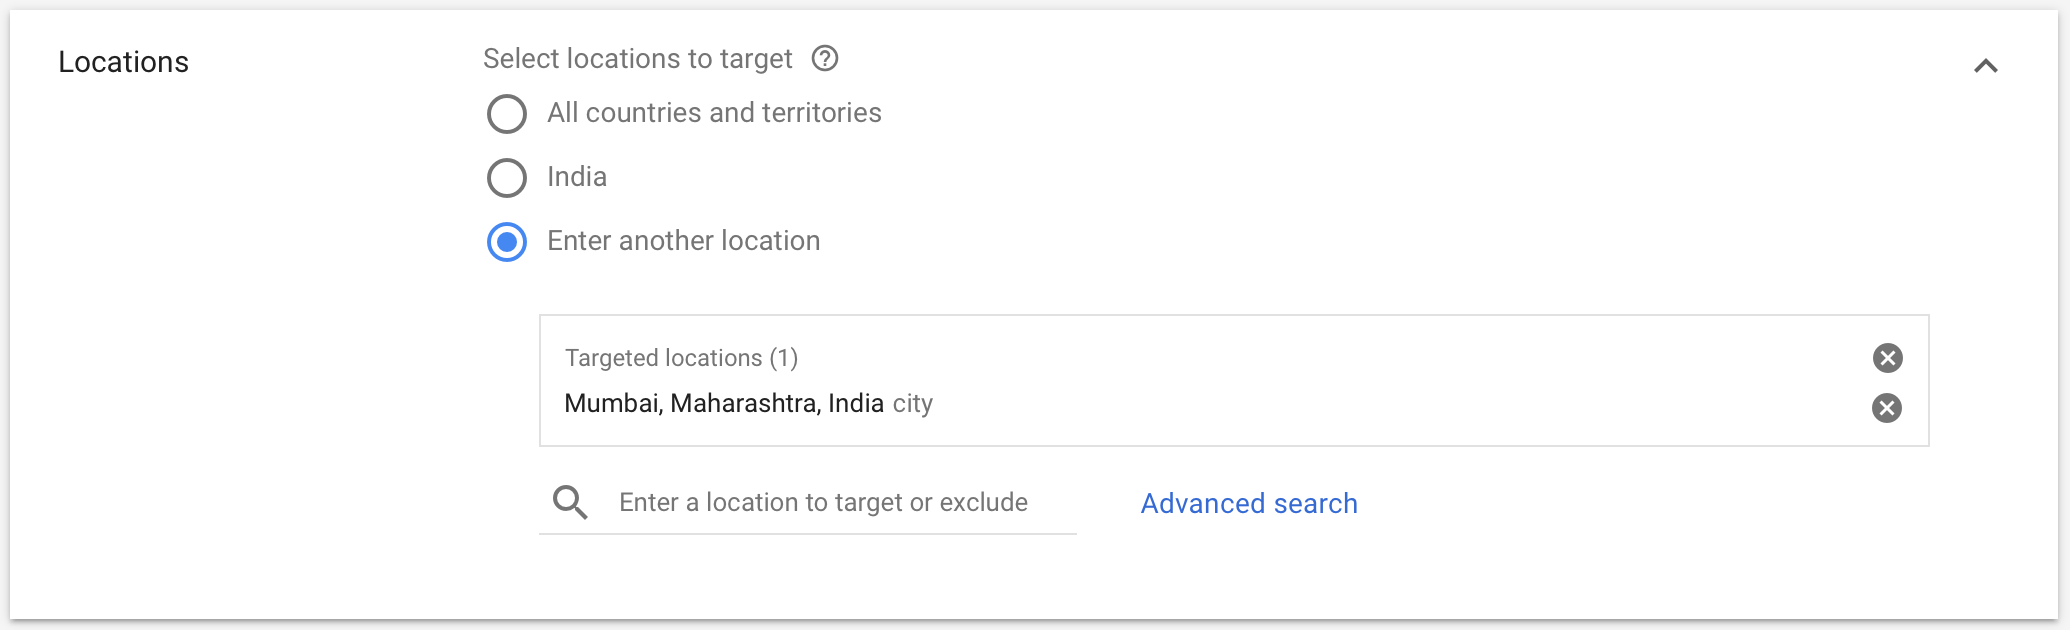 YouTube Ads Location Selection